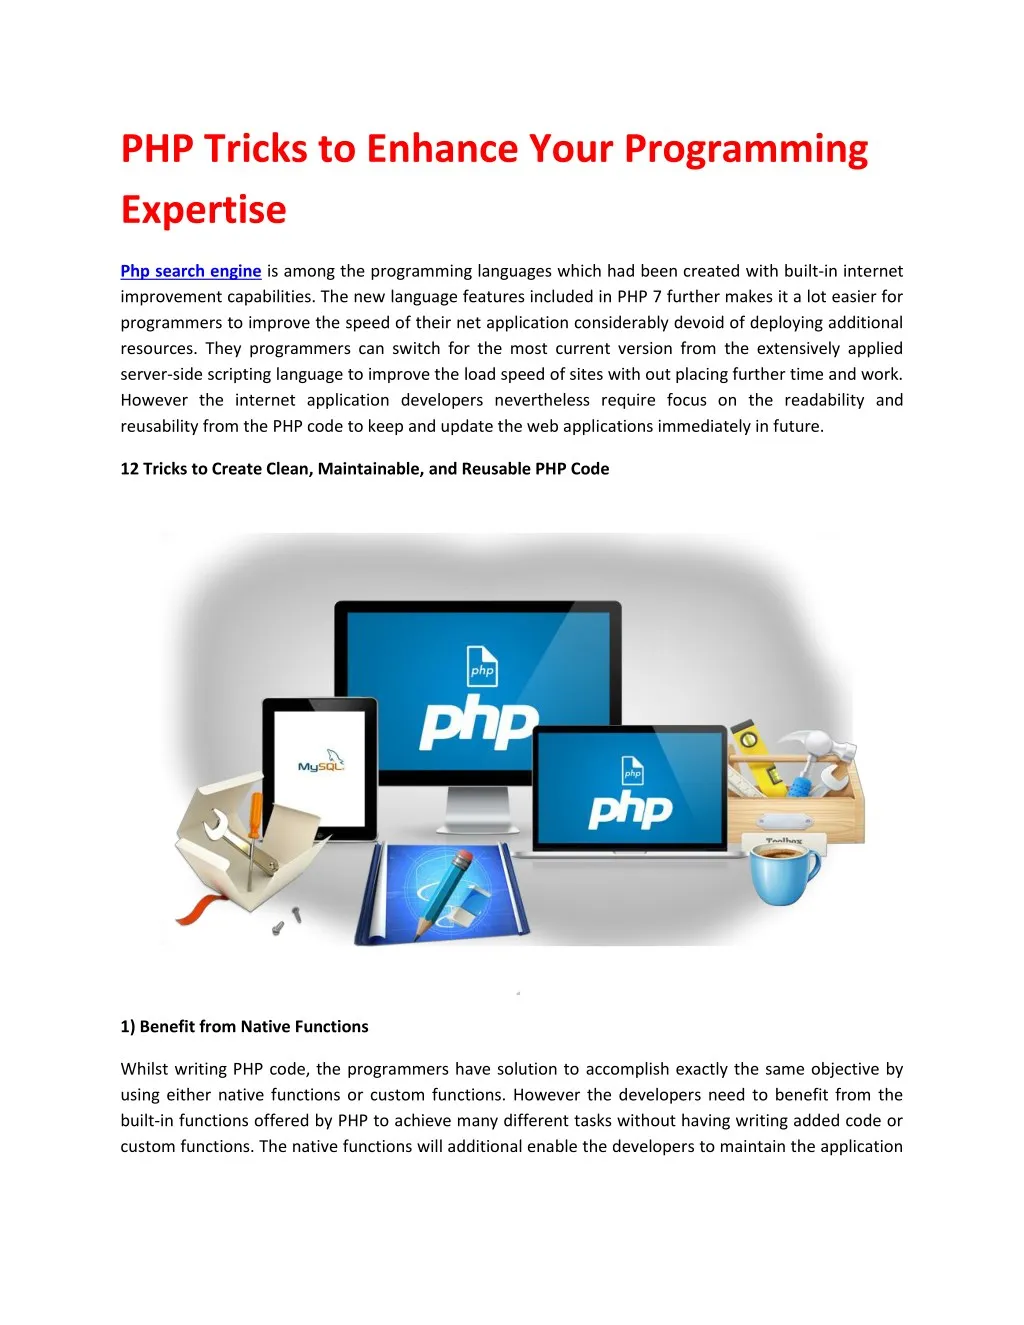 php tricks to enhance your programming expertise